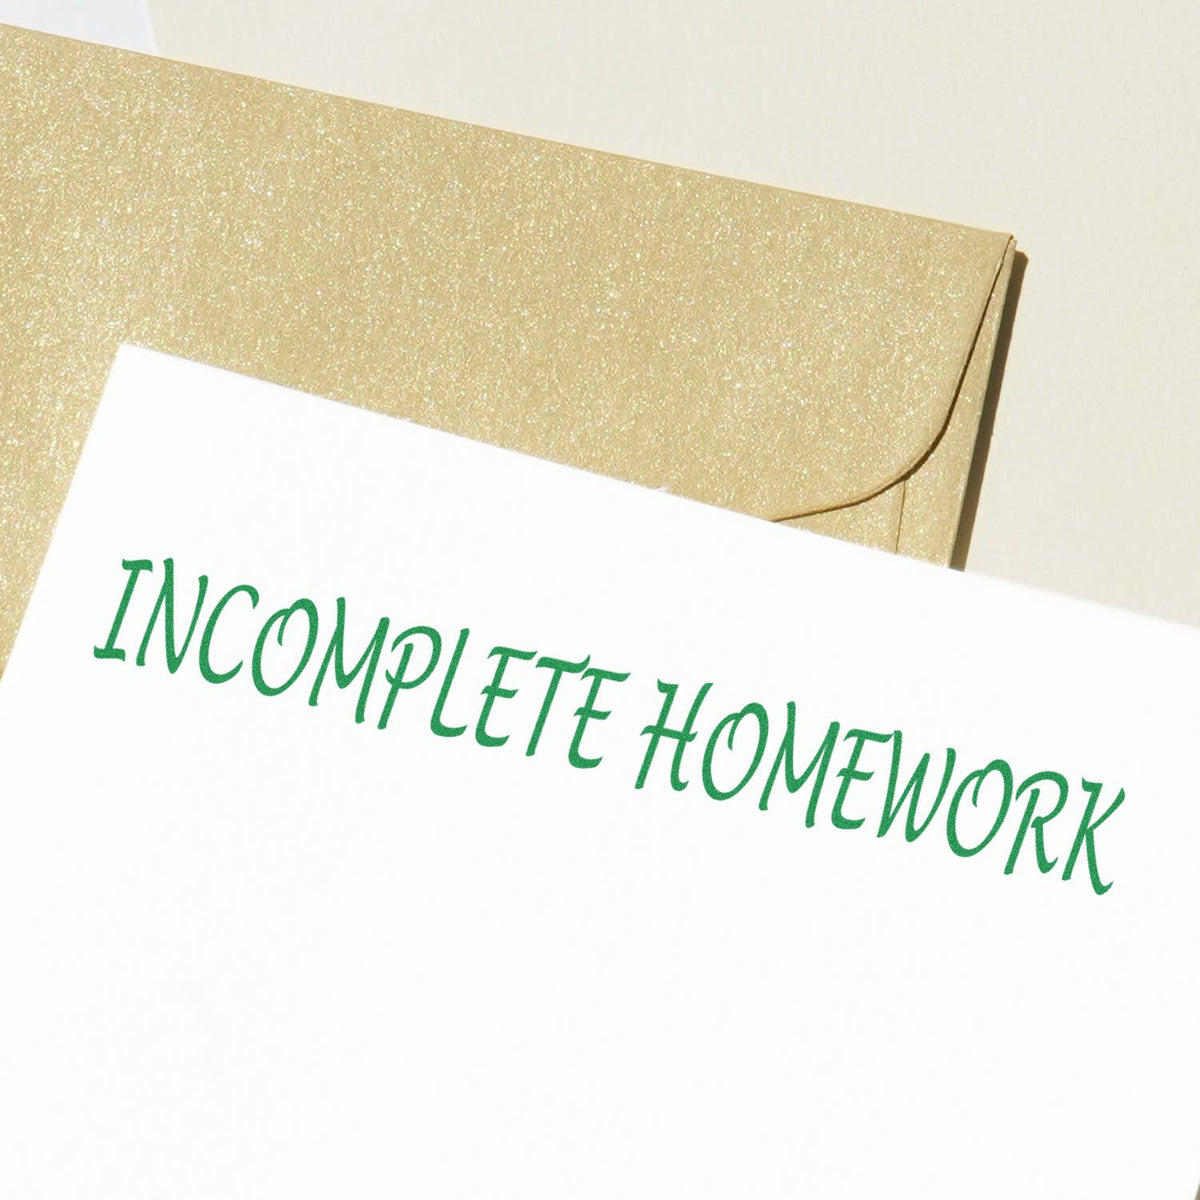 Incomplete Homework Rubber Stamp In Use